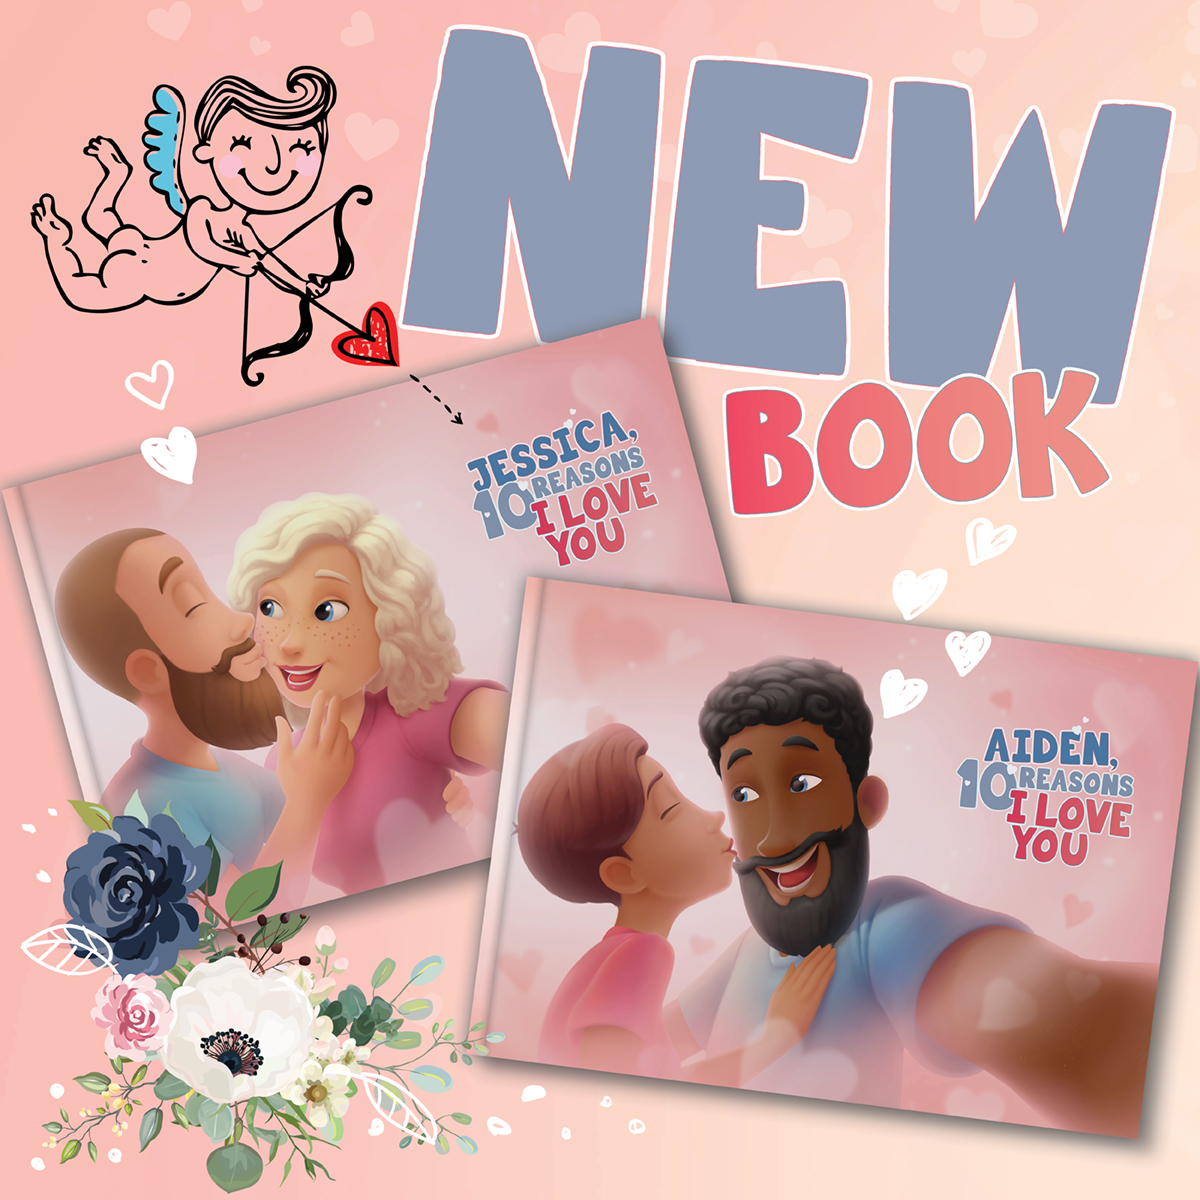 BRAND NEW Personalized Love You Book for Your Partner!